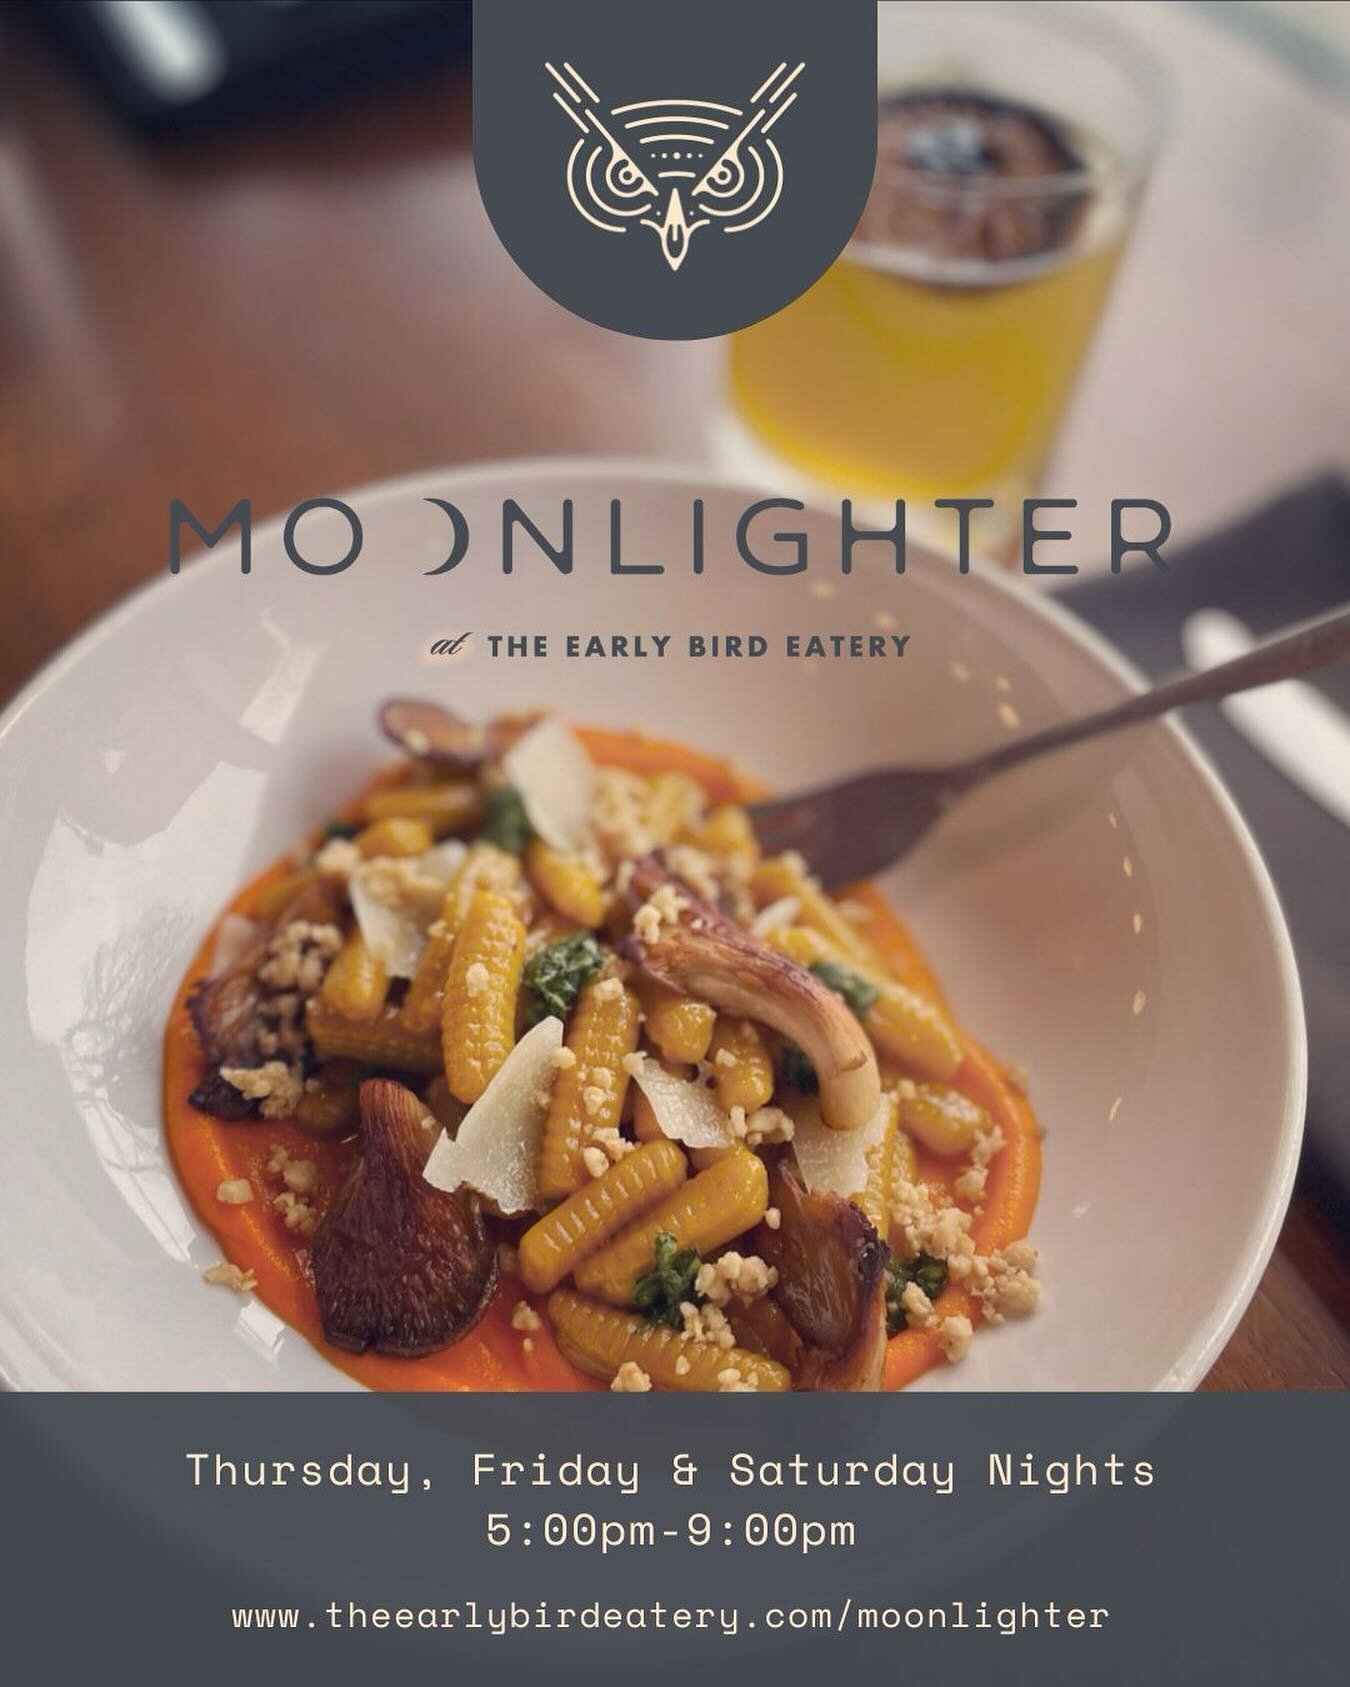 It&rsquo;s almost the weekend! Make your reservation now for @moonlighter_at_the_earlybird!

#freshpasta #cavatelli #oystermushrooms #veggiefood #goodfood #nightmoves #moonlighter #dtsouthbend